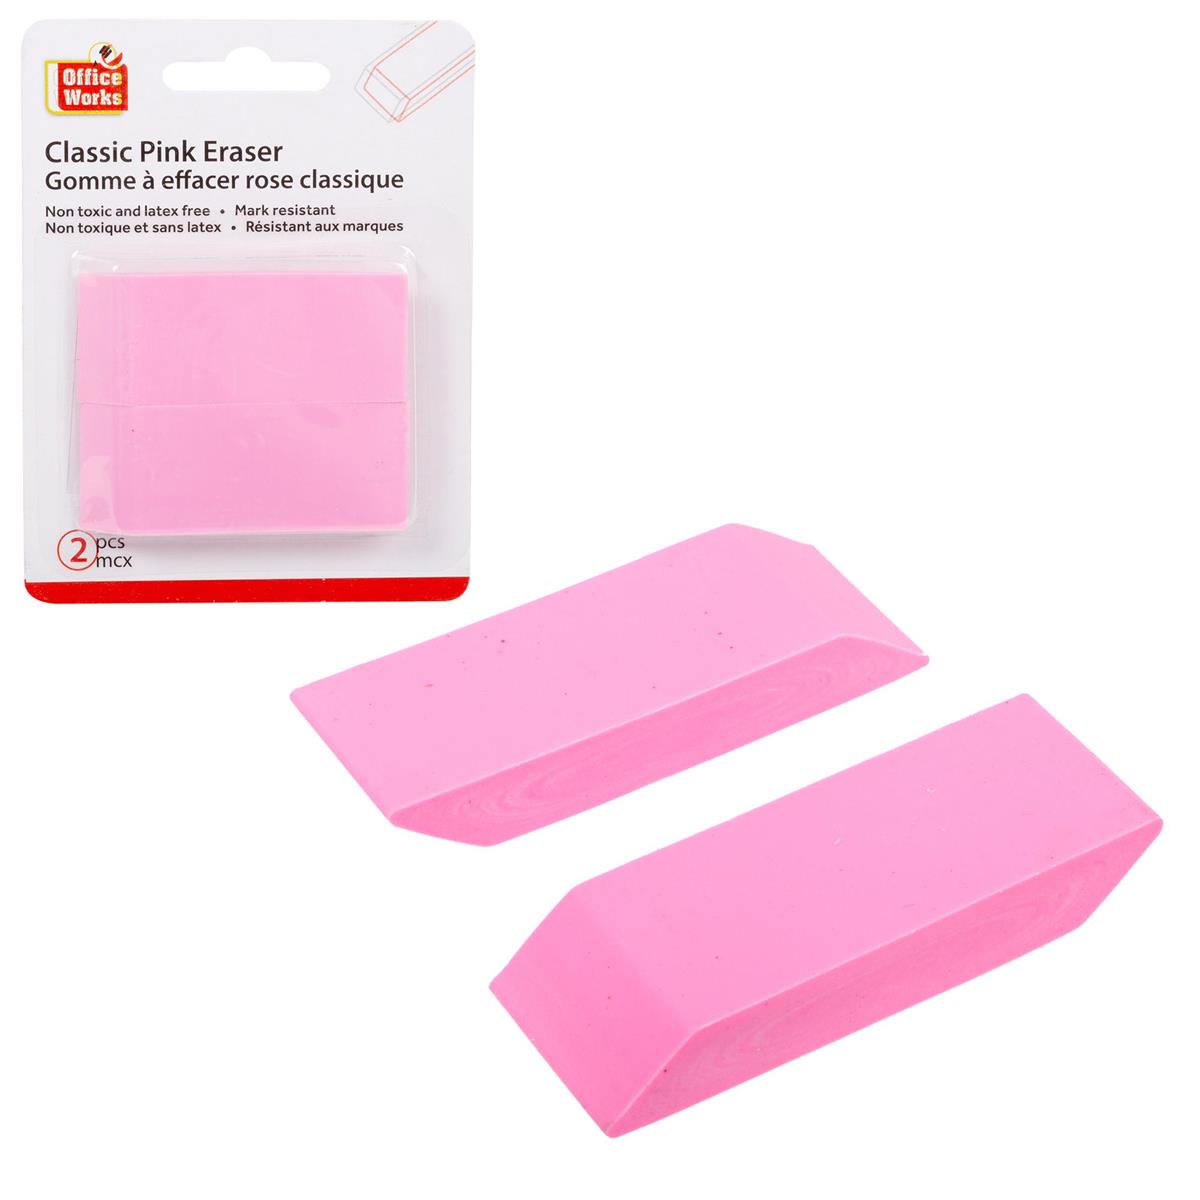 Office Works 2 pc Pink Eraser Non Toxic & Latex Fr